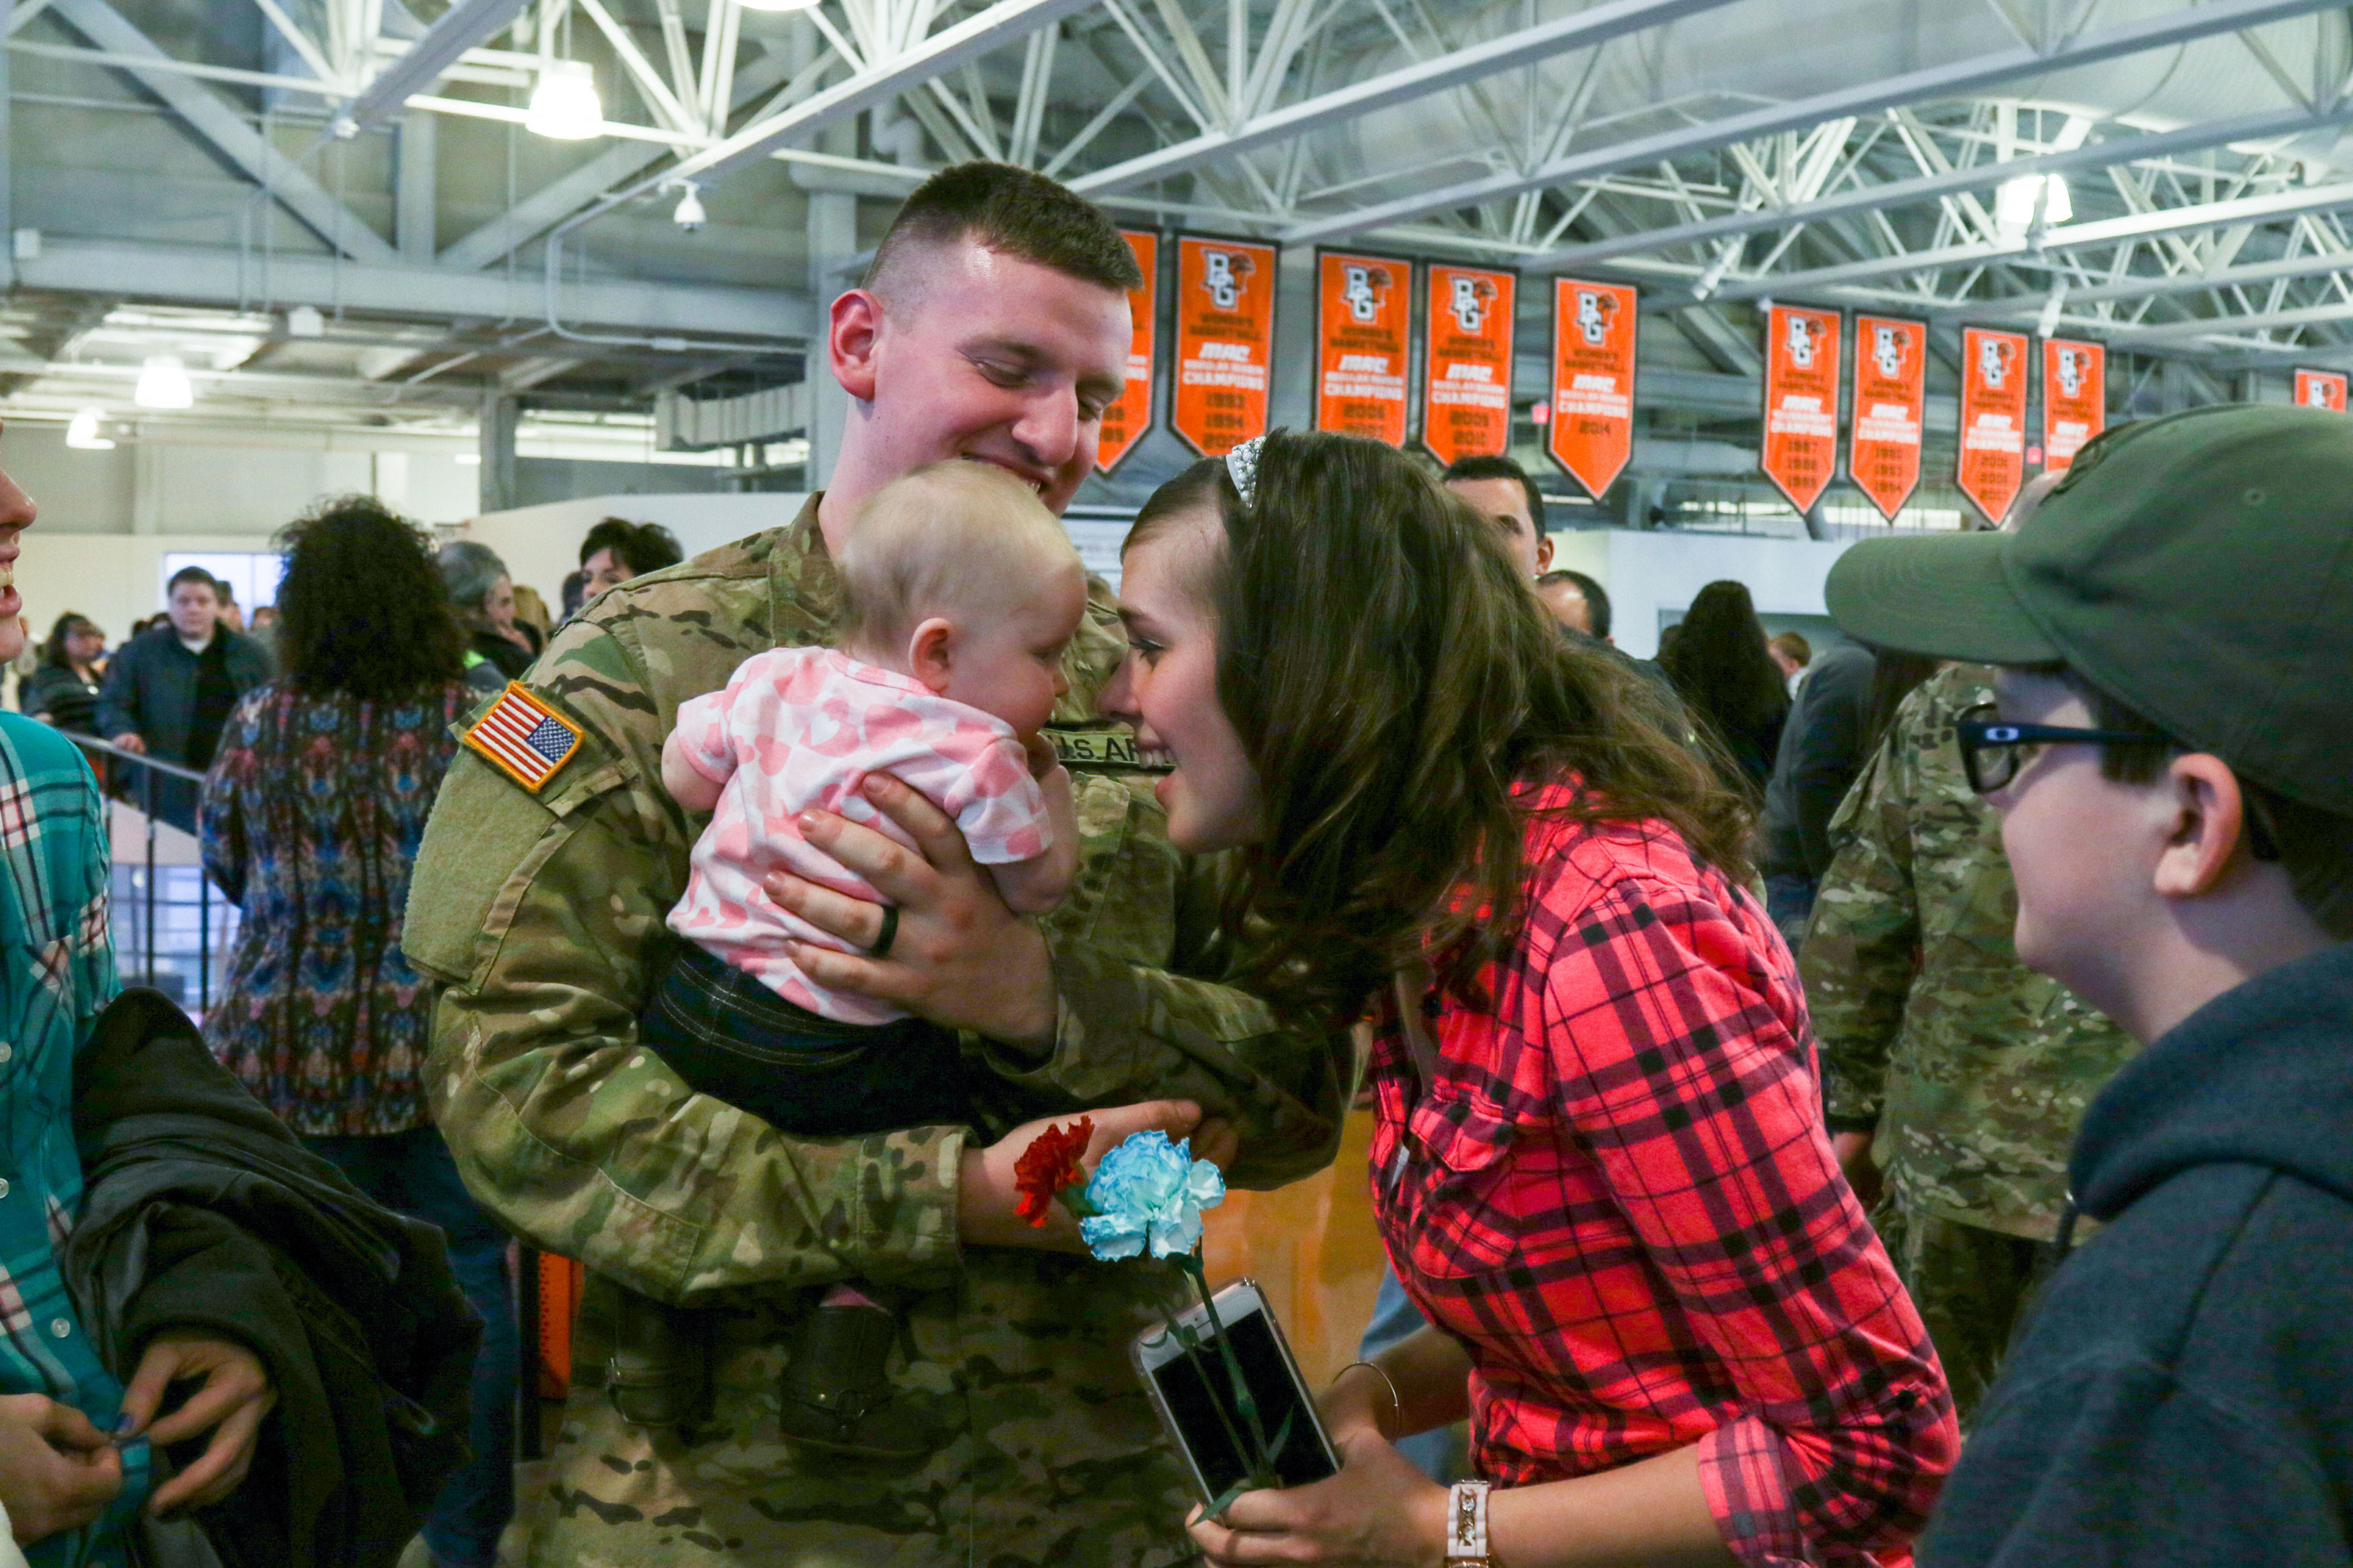 A  Soldier assigned to the 1st Battalion, 148th Infantry Regiment spends time with his Family after the unit’s call to duty ceremony Jan. 11, 2017, in Bowling Green, Ohio.  (Ohio National Guard/ Michael Carden)